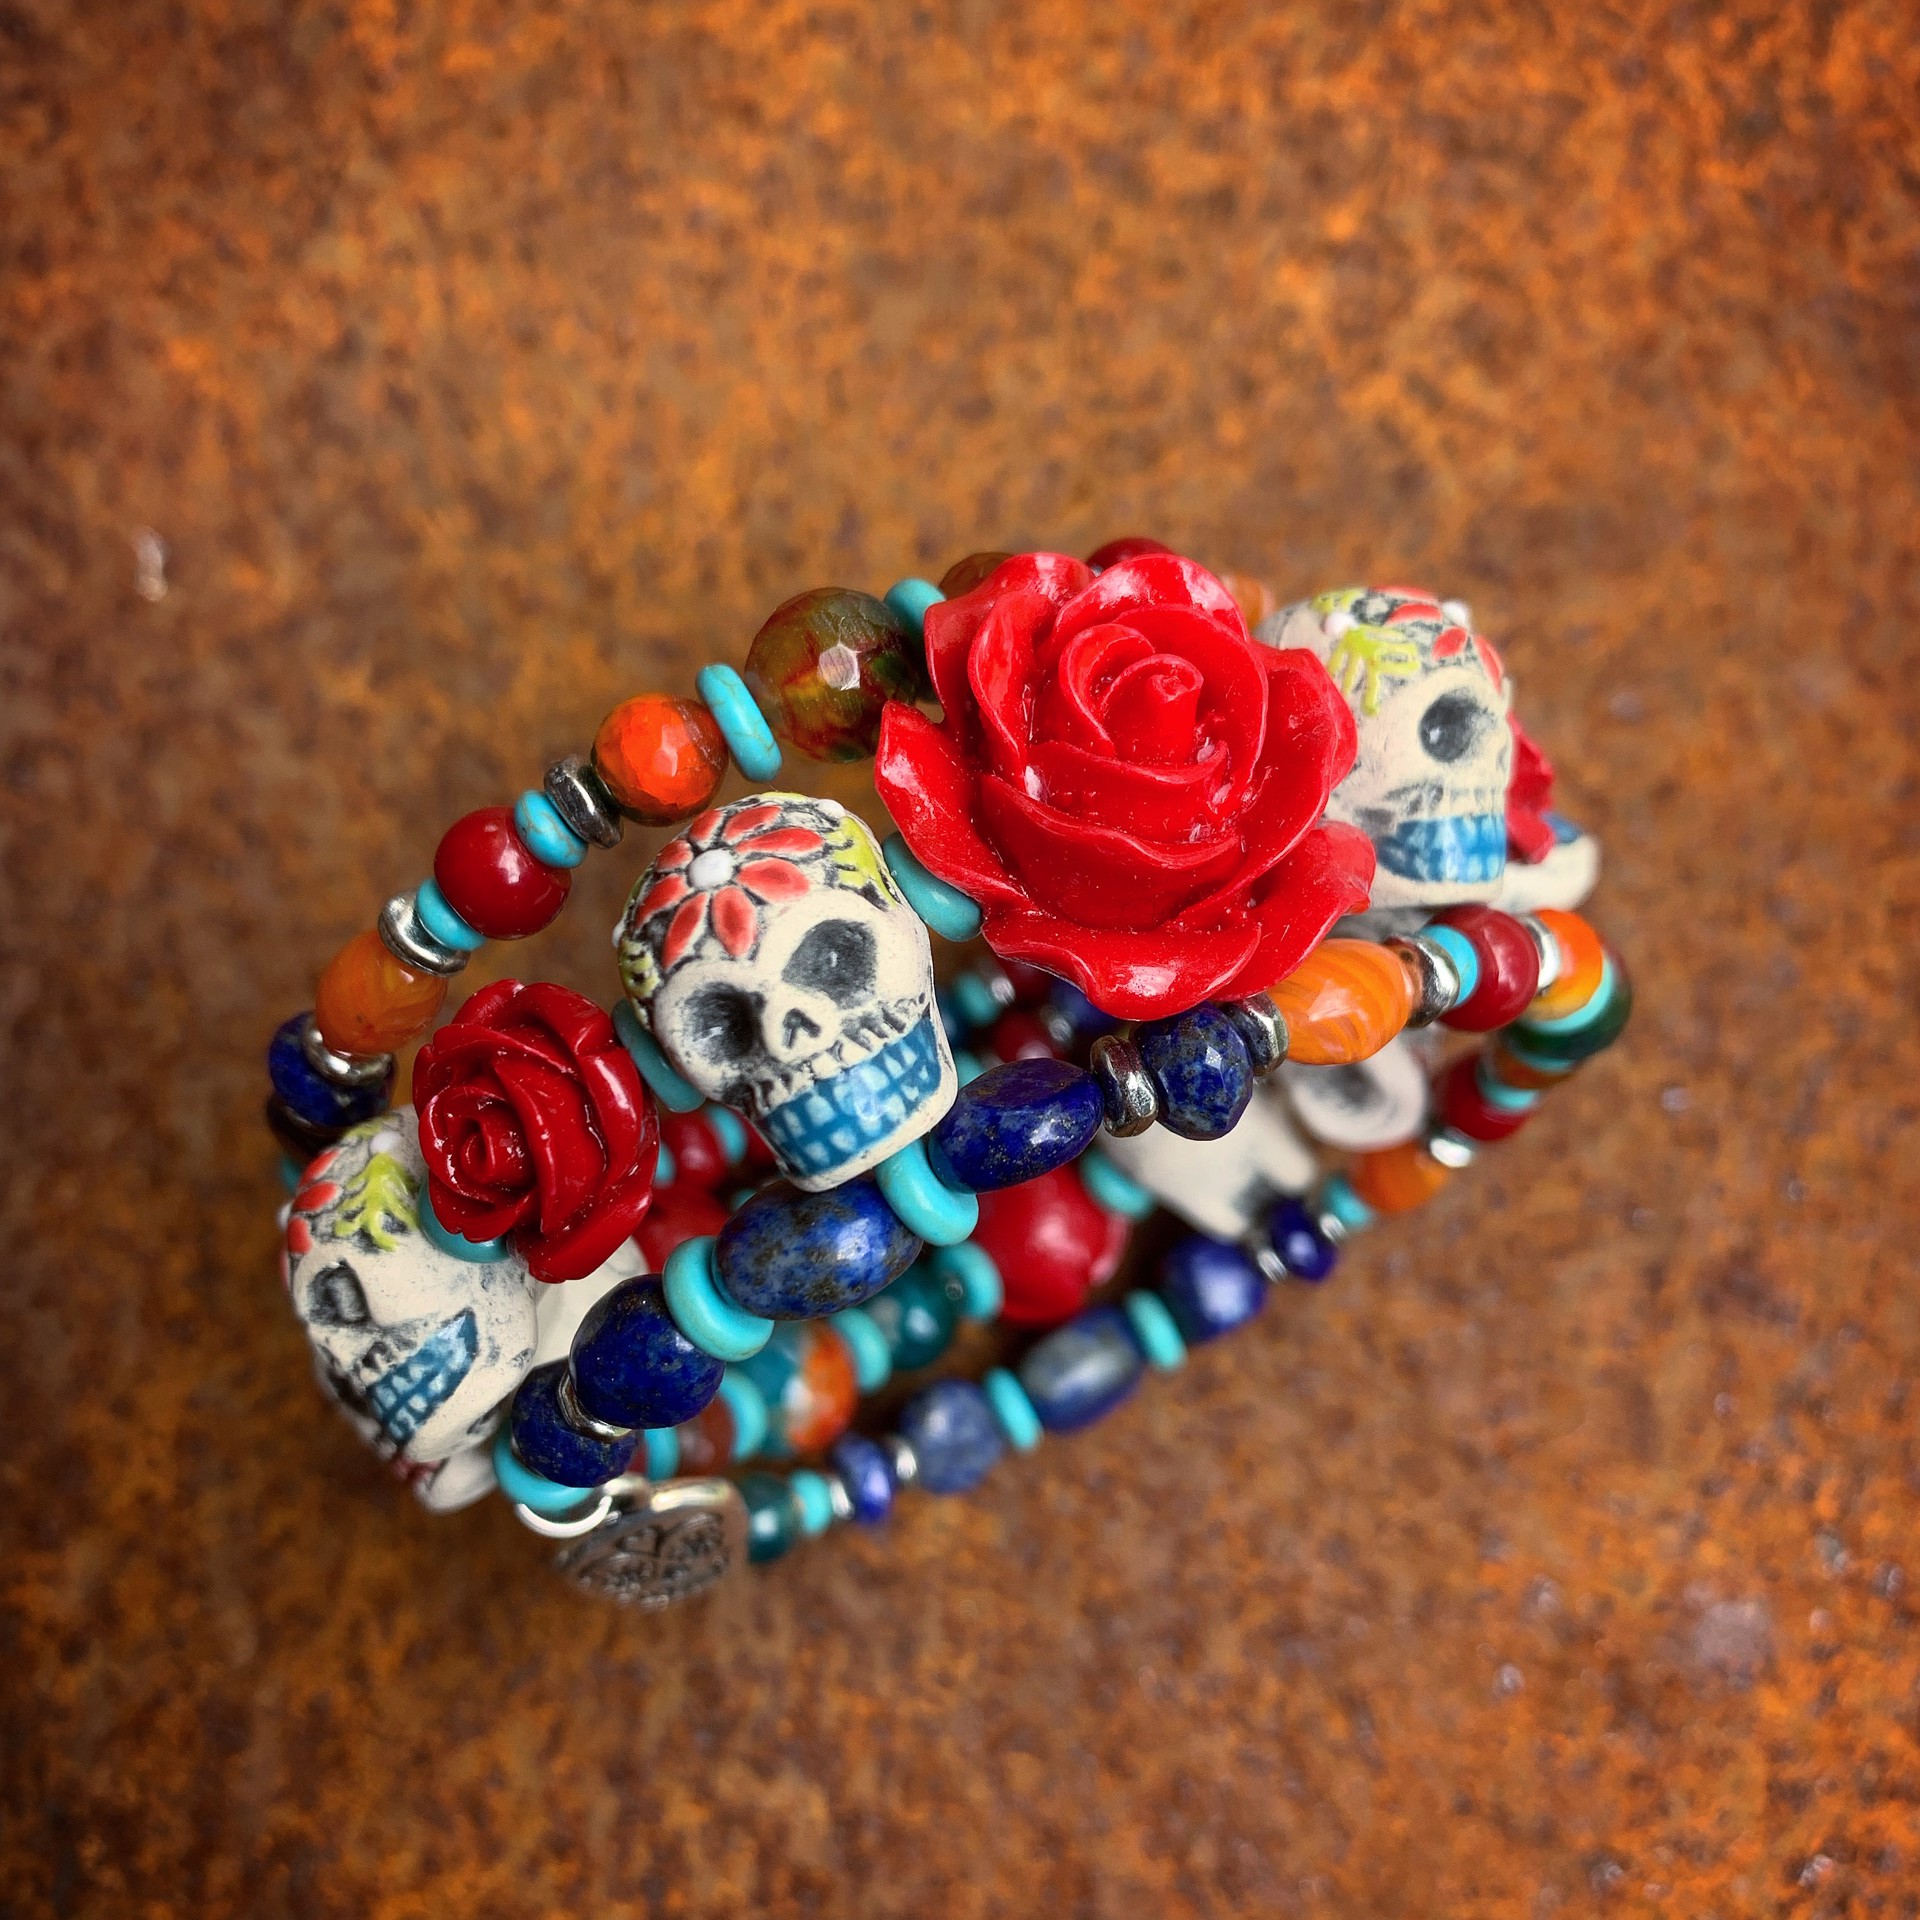 K637 Skulls and Red Roses by Kelly Ormsby